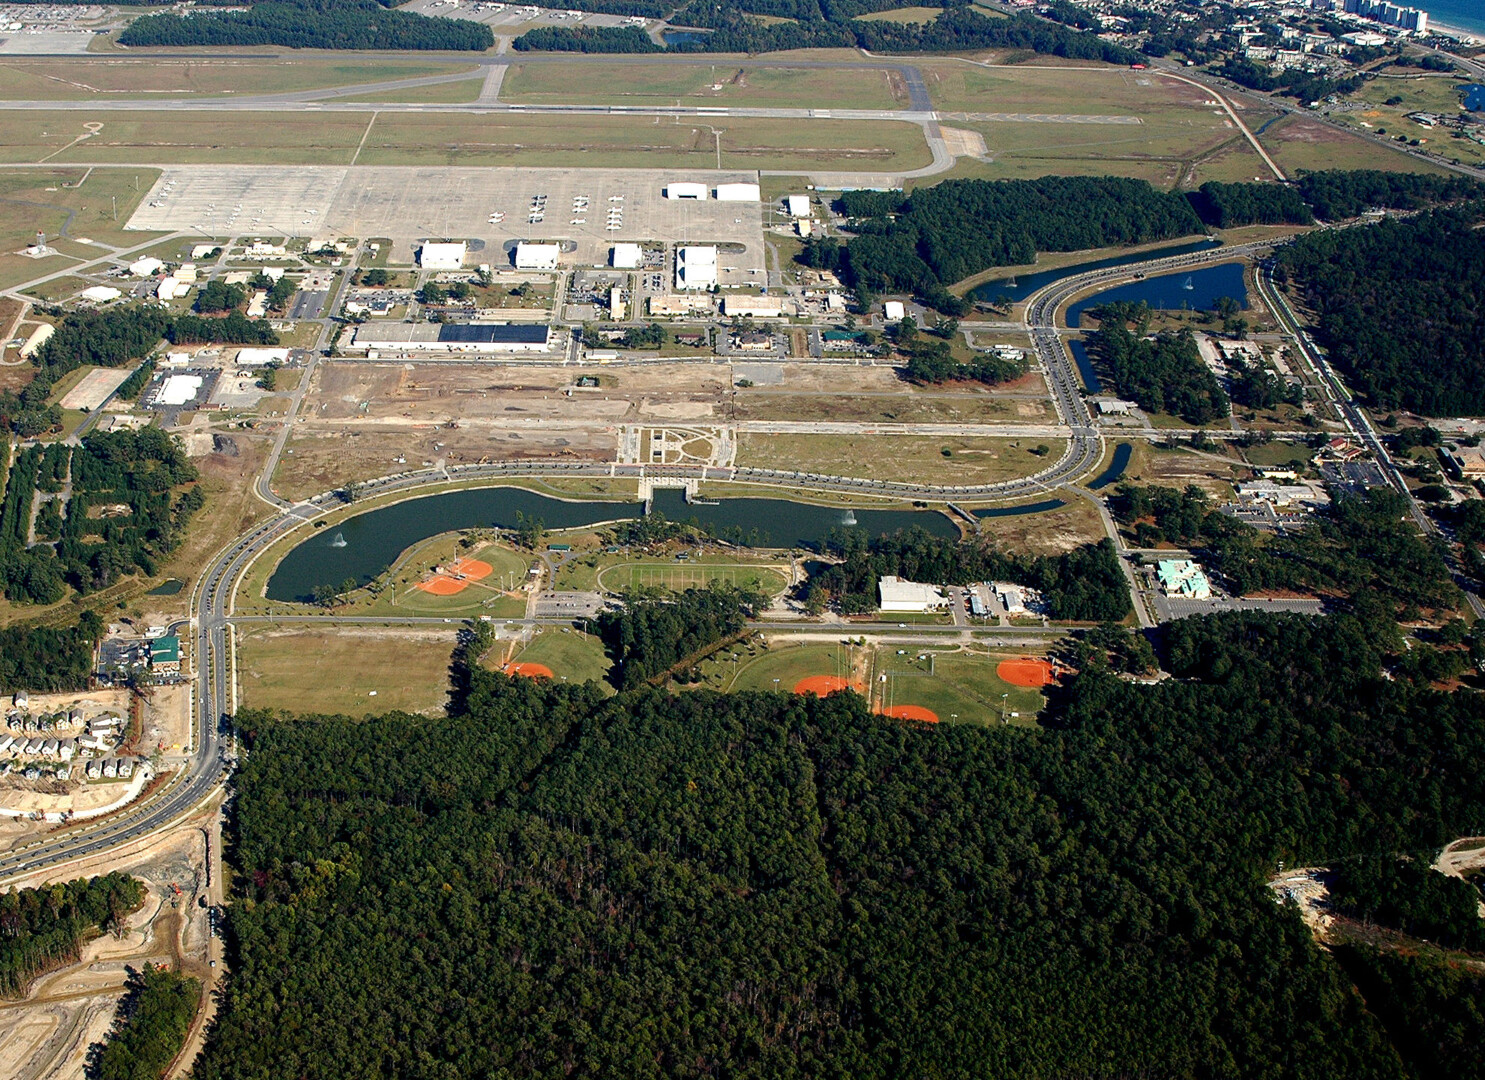 Market Common Air Force Base